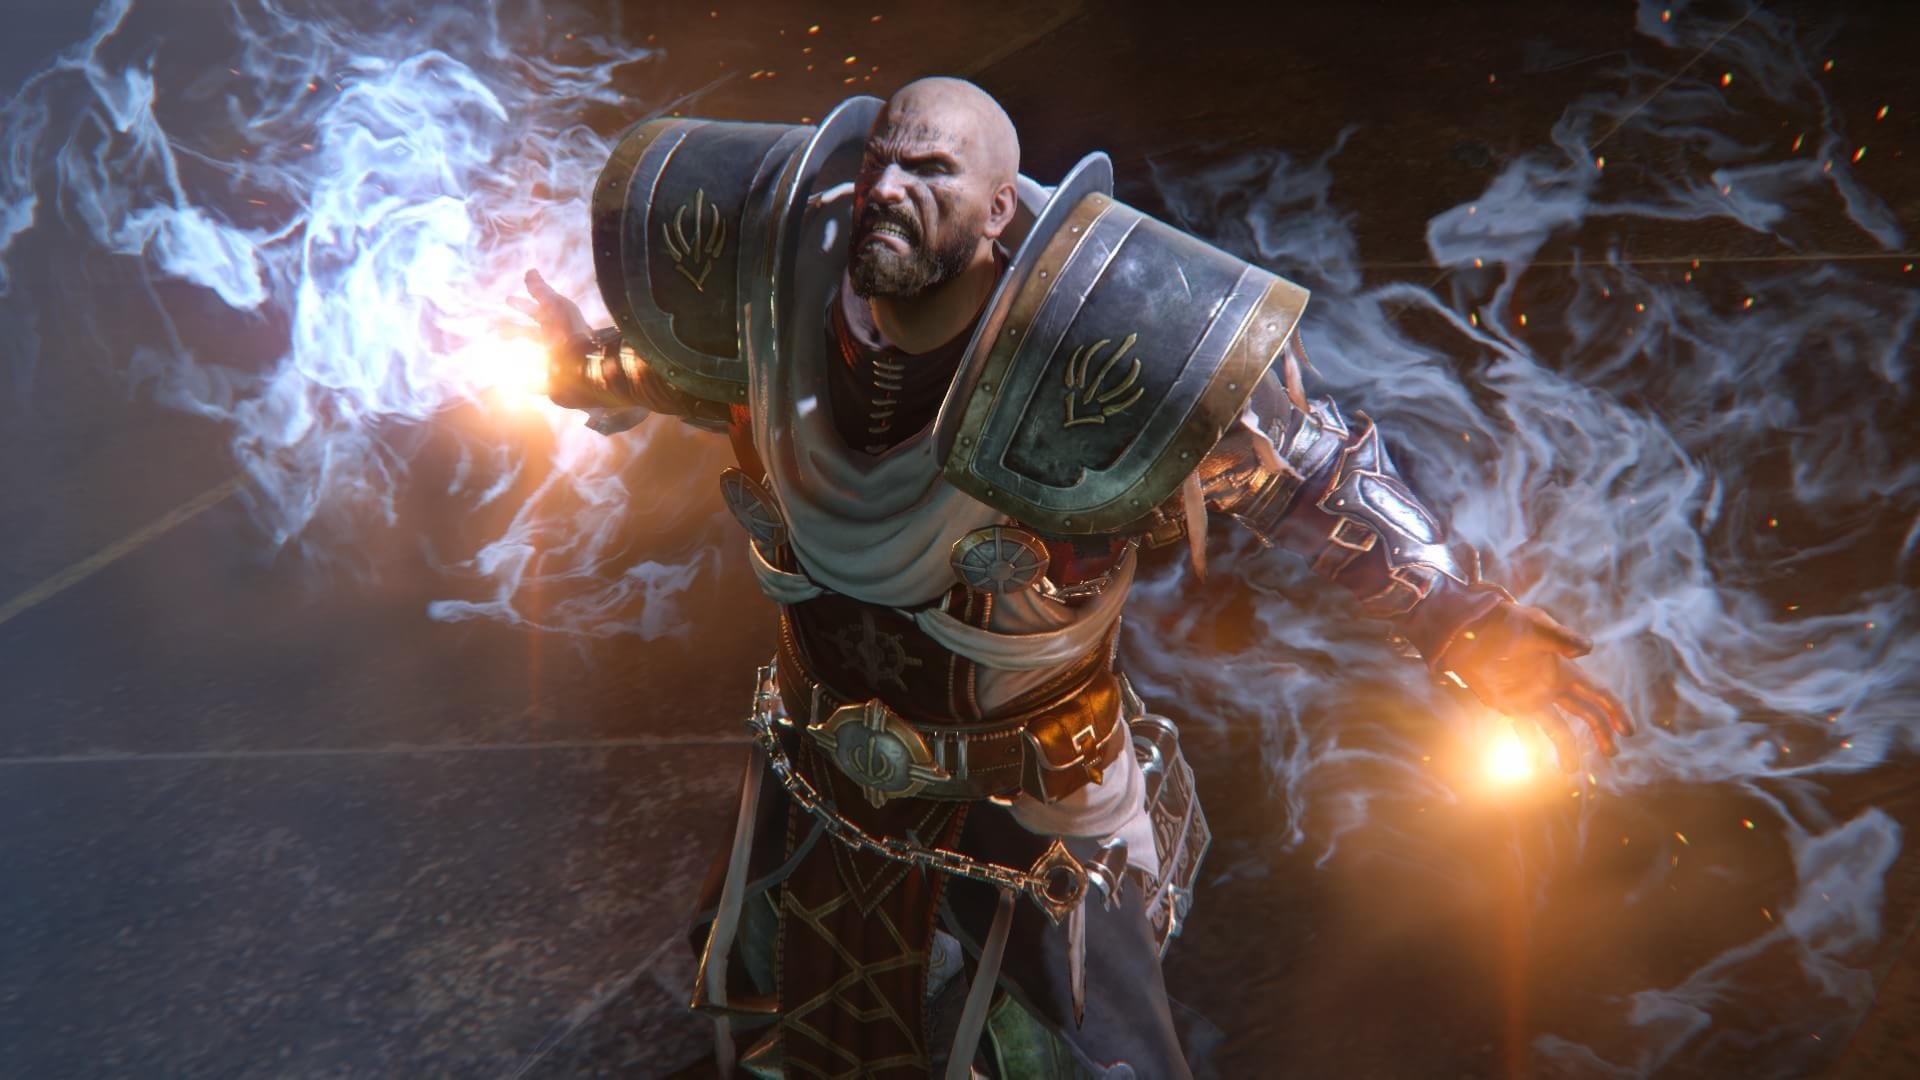 Lords of The Fallen, vale a pena??